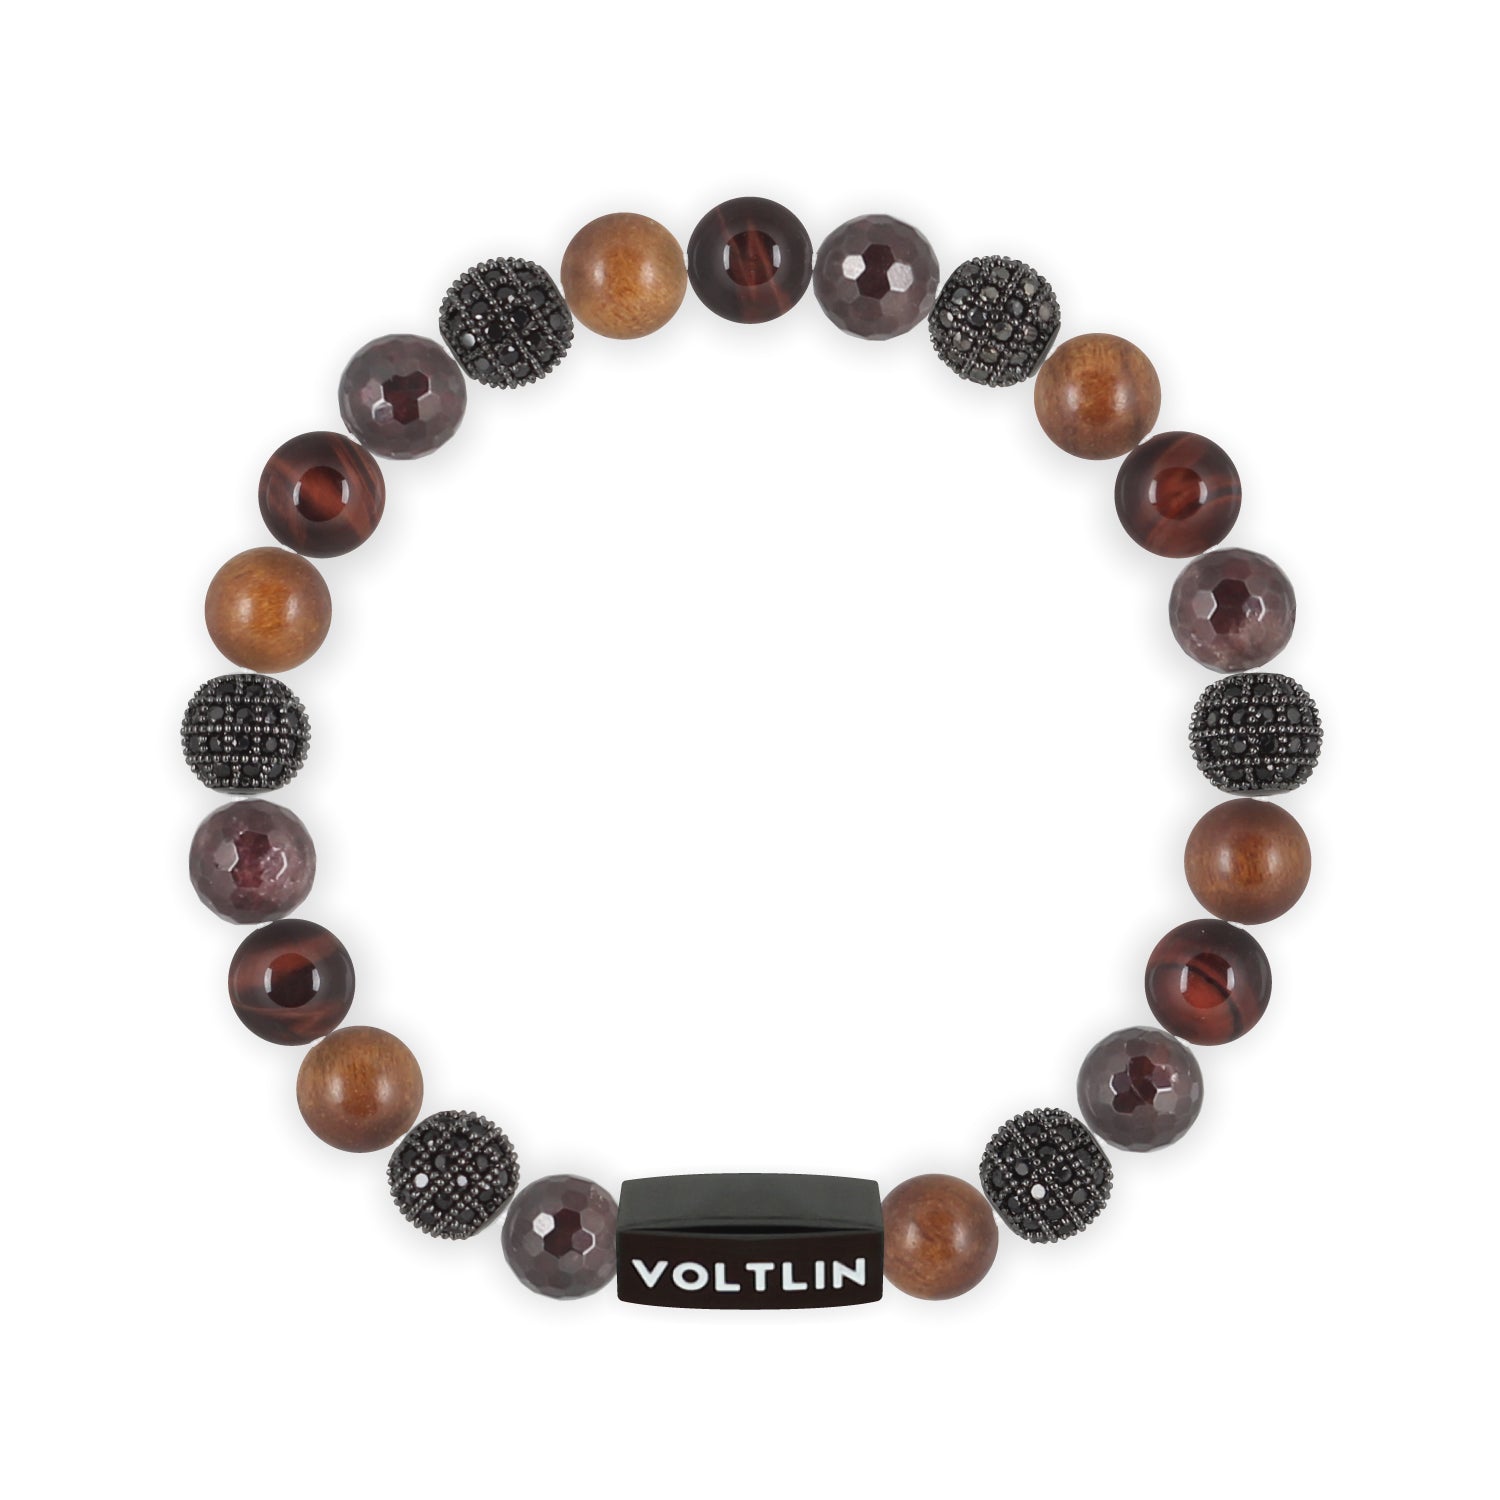 Front view of an 8mm Maroon Sirius beaded stretch bracelet featuring Faceted Garnet, Black Pave, Rosewood, & Red Tiger’s Eye crystal and black stainless steel logo bead made by Voltlin